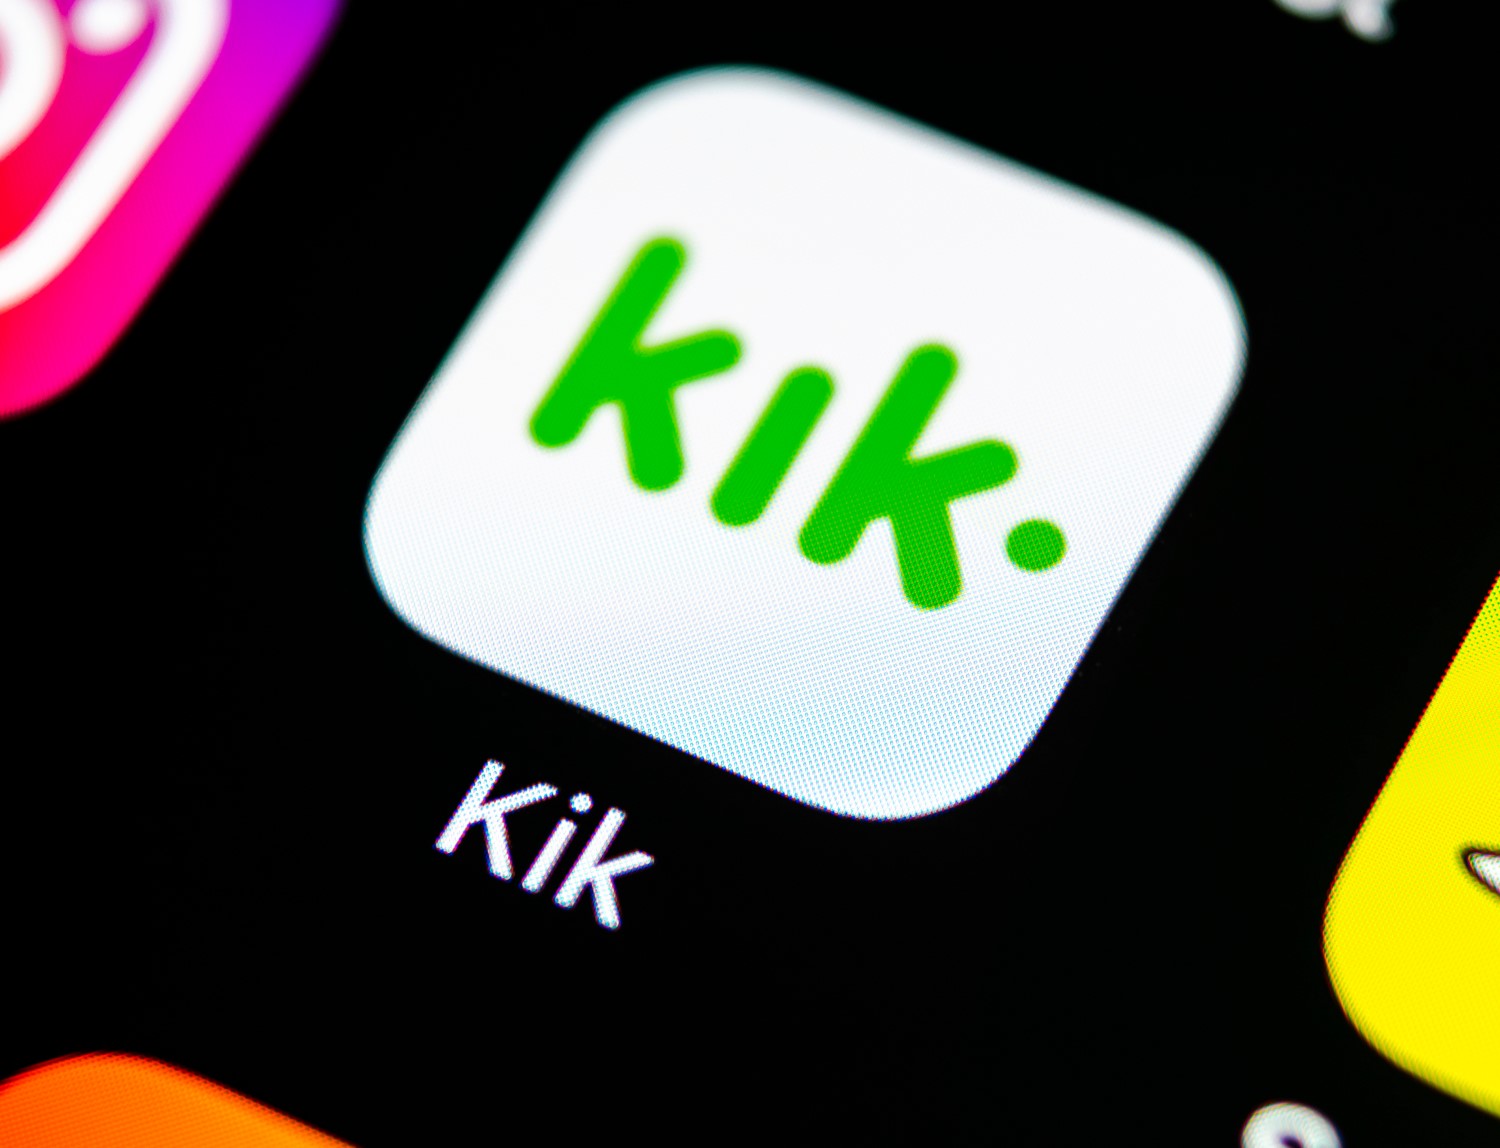 Chat App Kik Says It Will Fight SEC Over Possible ICO Action